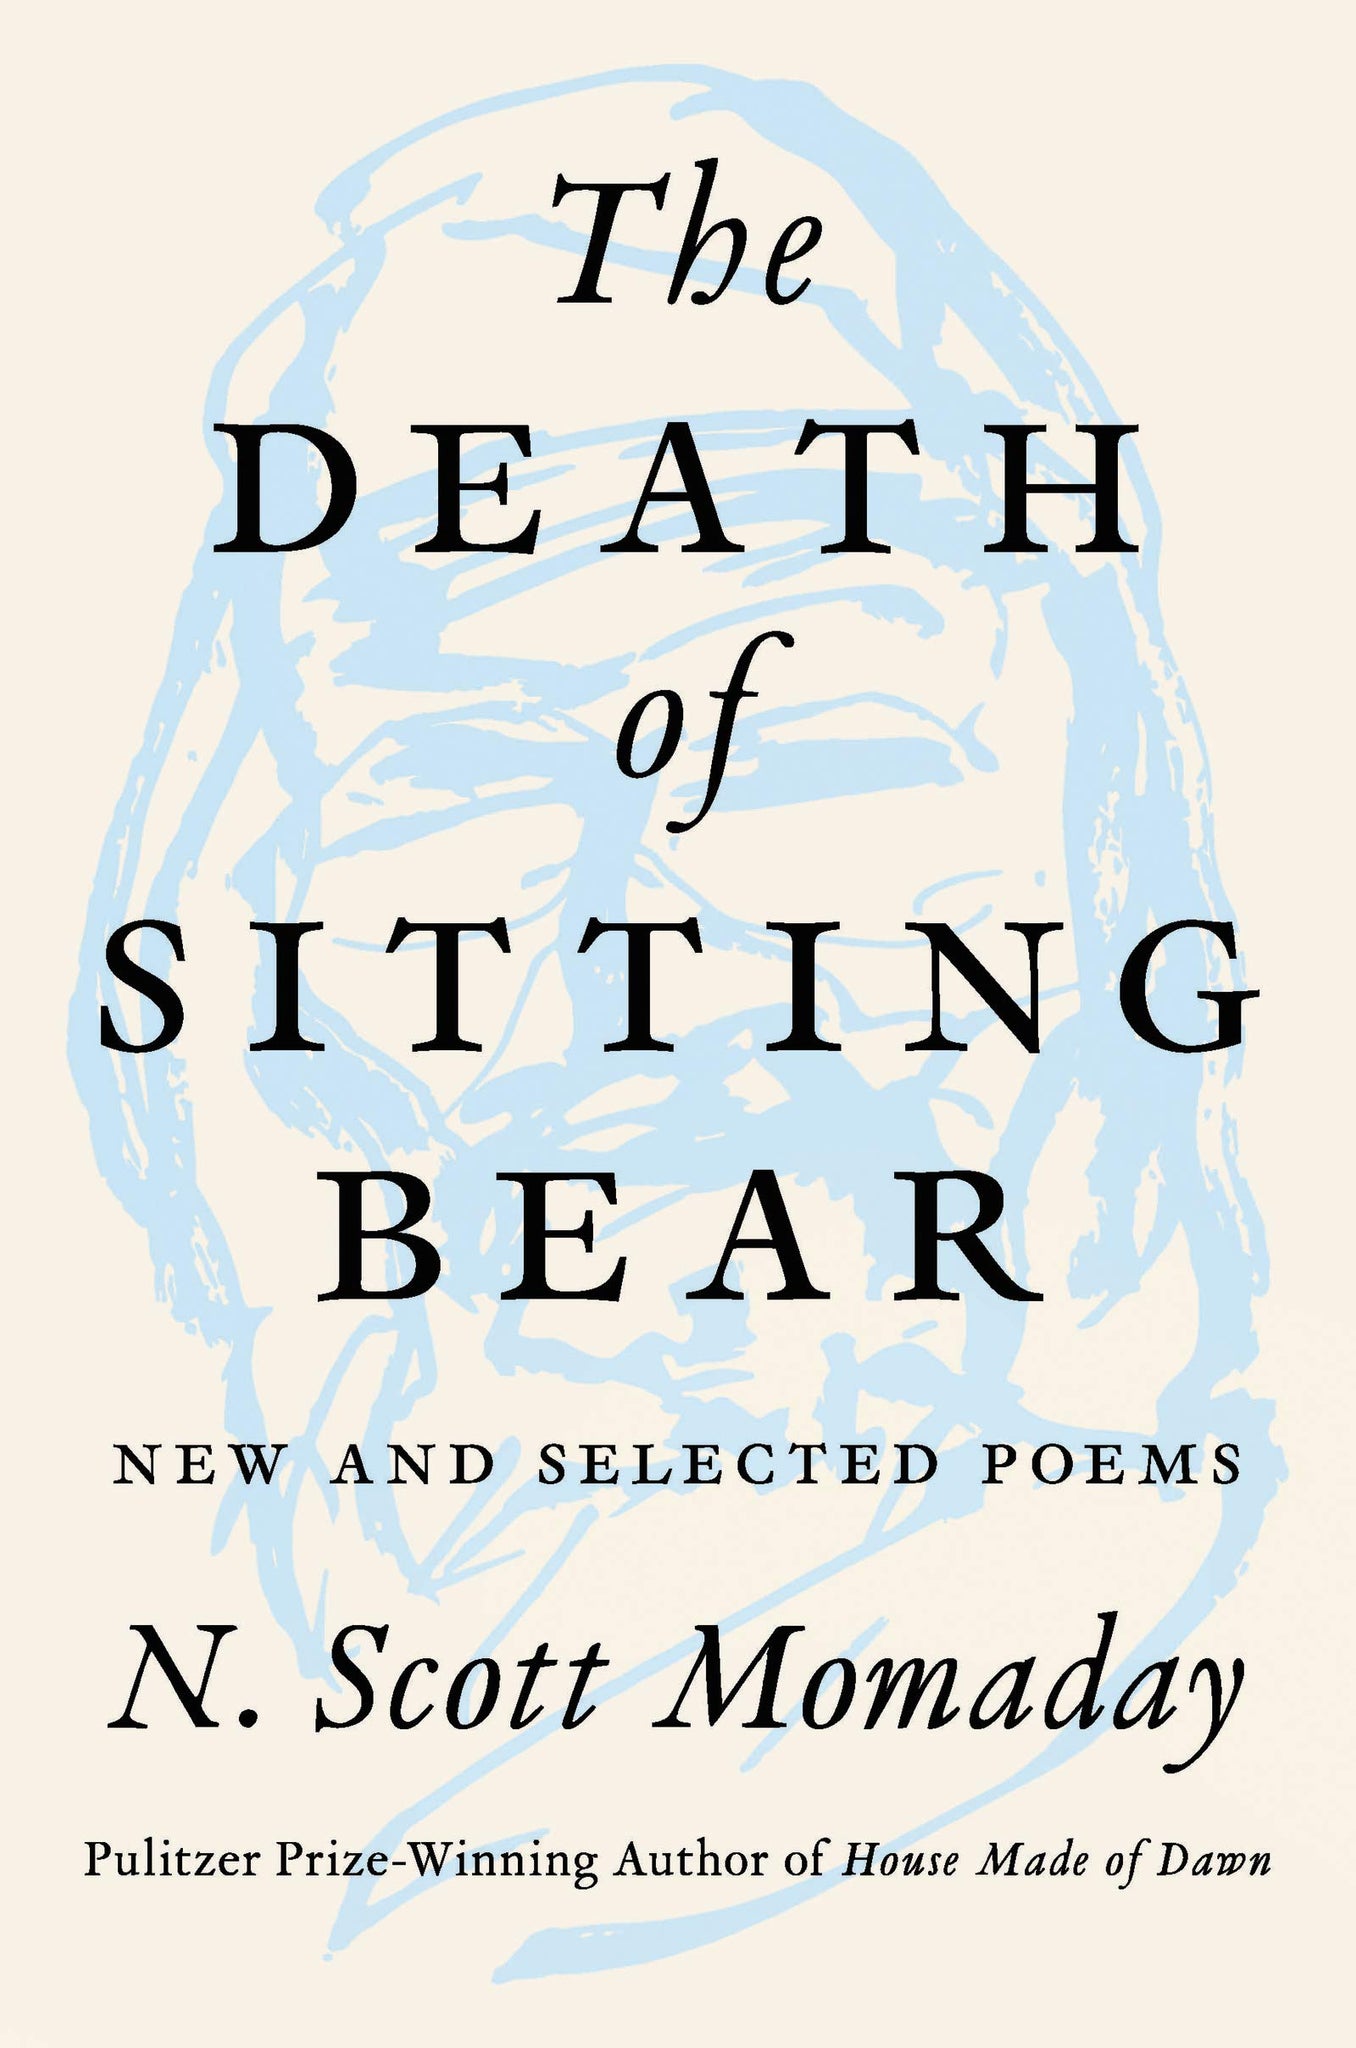 The Death of Sitting Bear: New and Selected Poems of N. Scott Momaday (Hardcover)